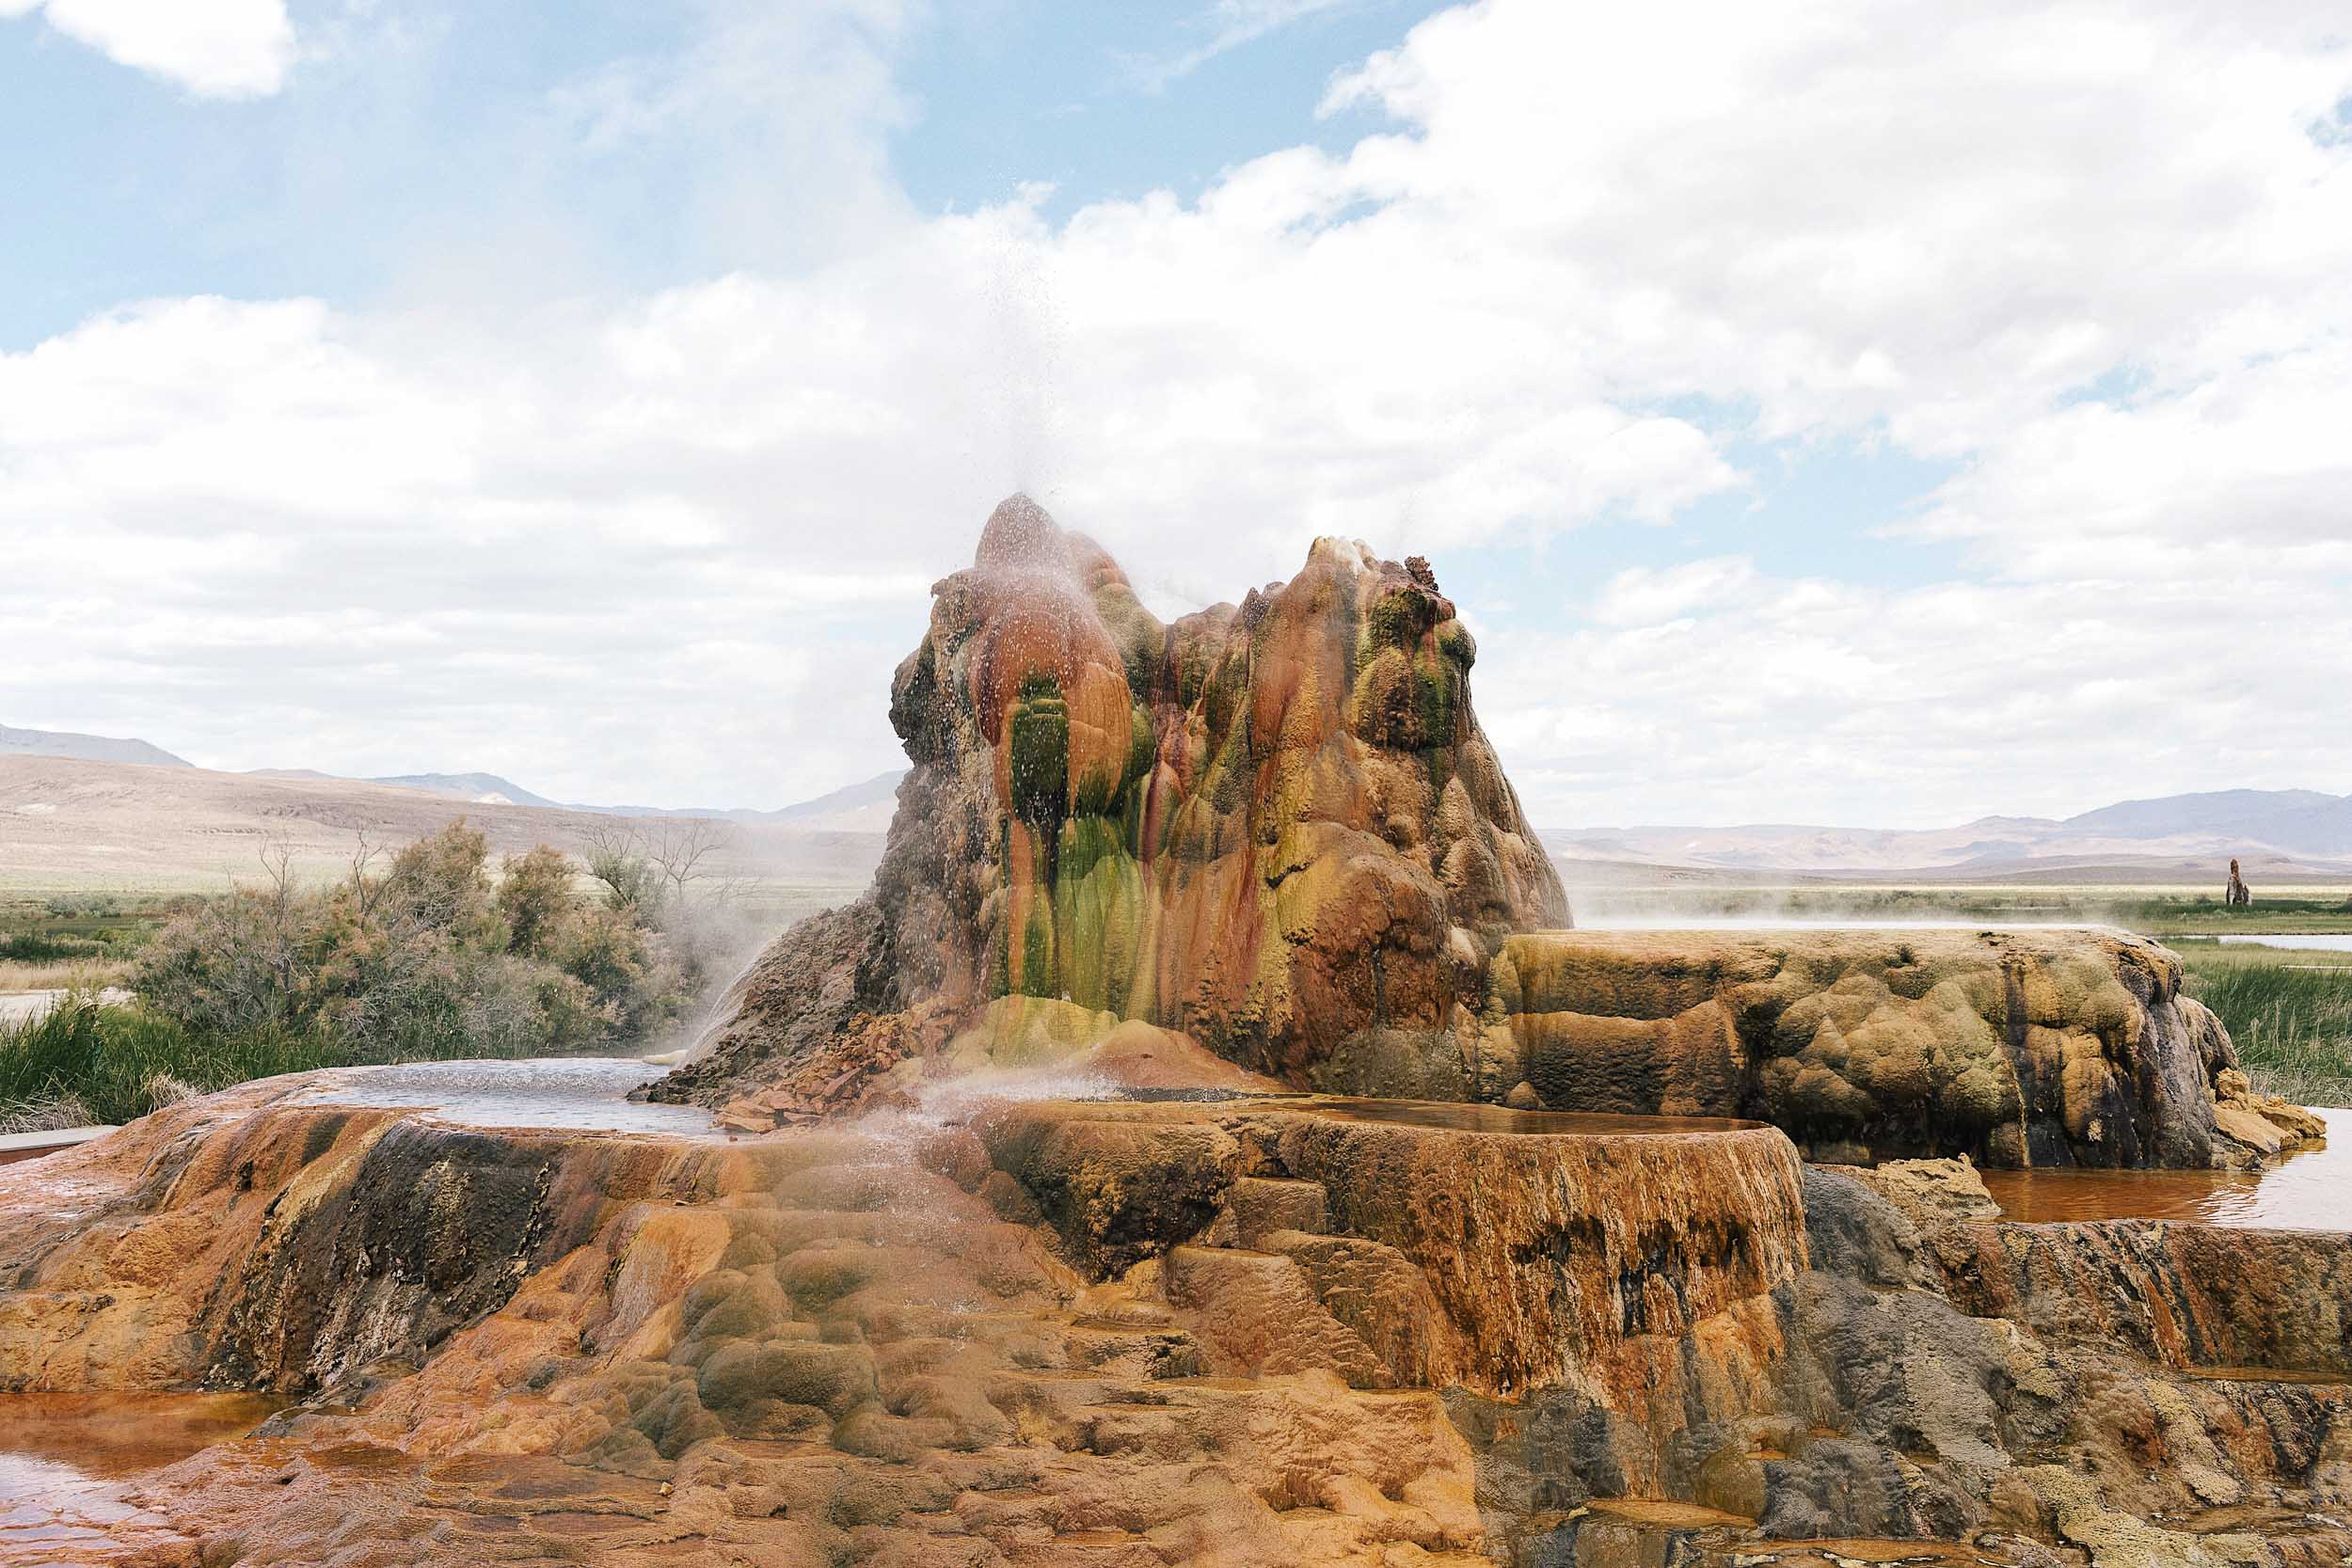 Fly Geyser - the most amazing natural wonder in Nevada